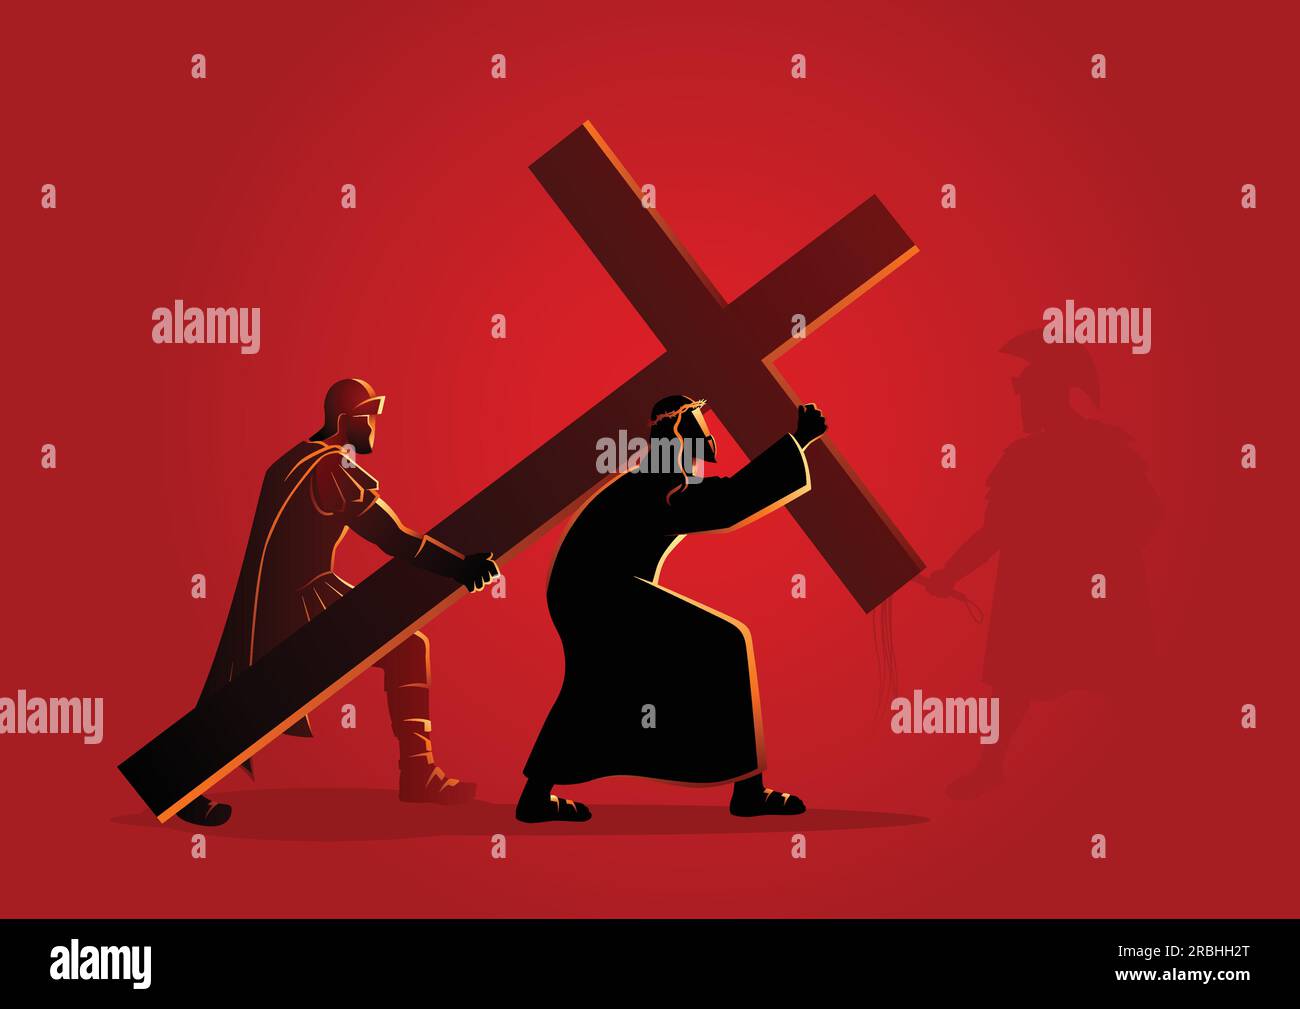 Biblical vector illustration series. Way of the Cross or Stations of the Cross, second station, Jesus accepts his cross. Stock Vector